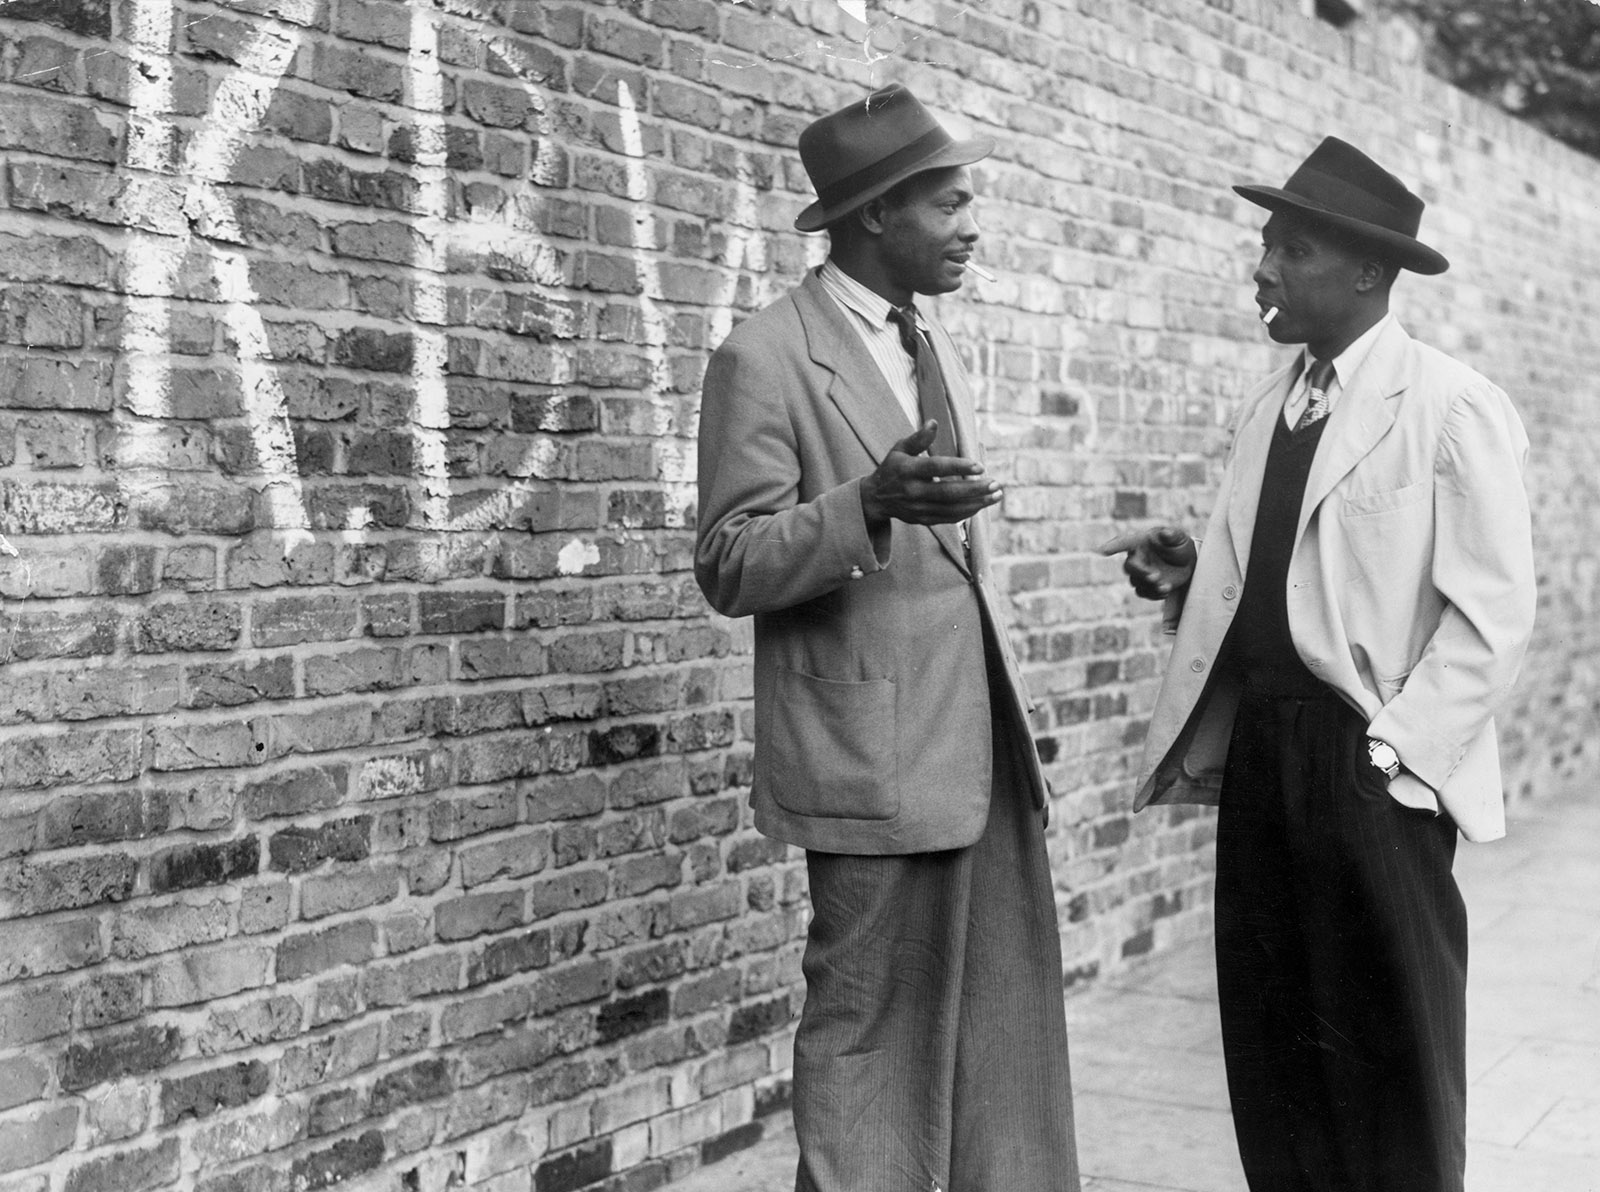 Two men talking in a Brixton street; in the background, the graffiti stands for “Keep Britain White,” London, June 9, 1952